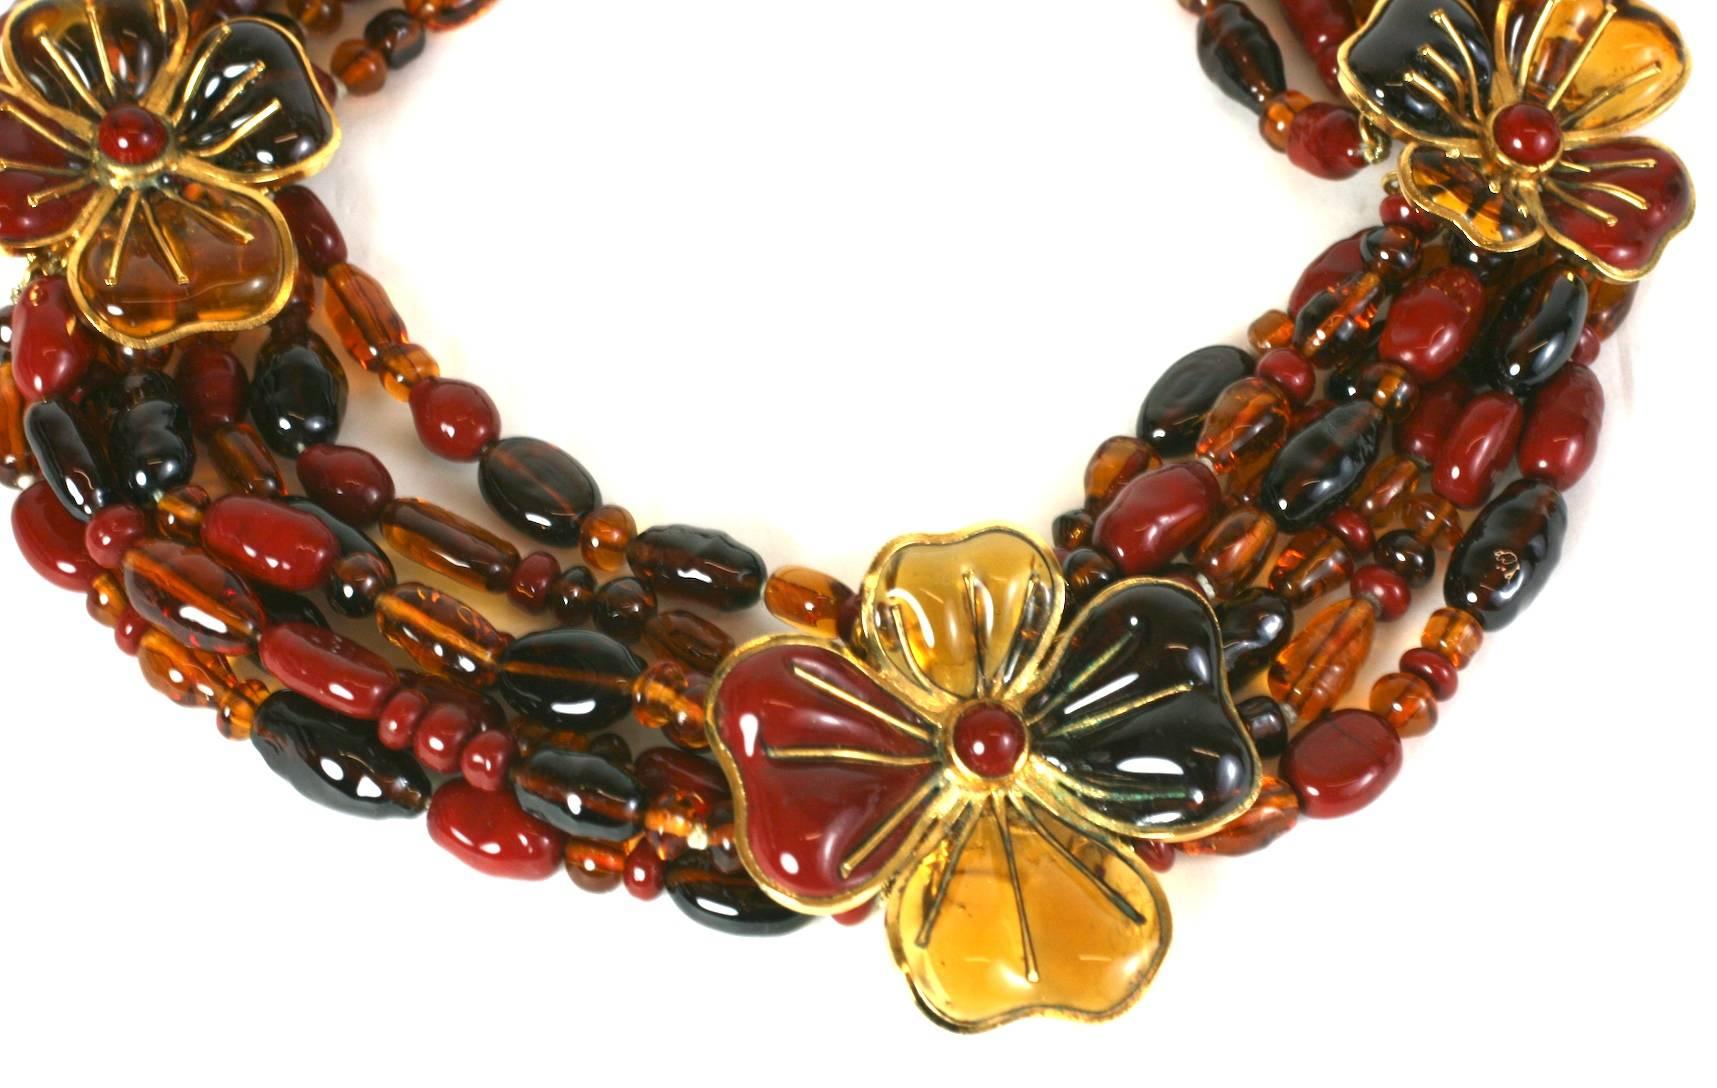 Striking Histoire de Verre Autumnal Pate de Verre Suite Necklace with large bib necklace and ear clips.
Completely handmade poured glass flower stations with hand made beads in tonal autumnal colors. Completely hand made in the Gripoix manner. Clip